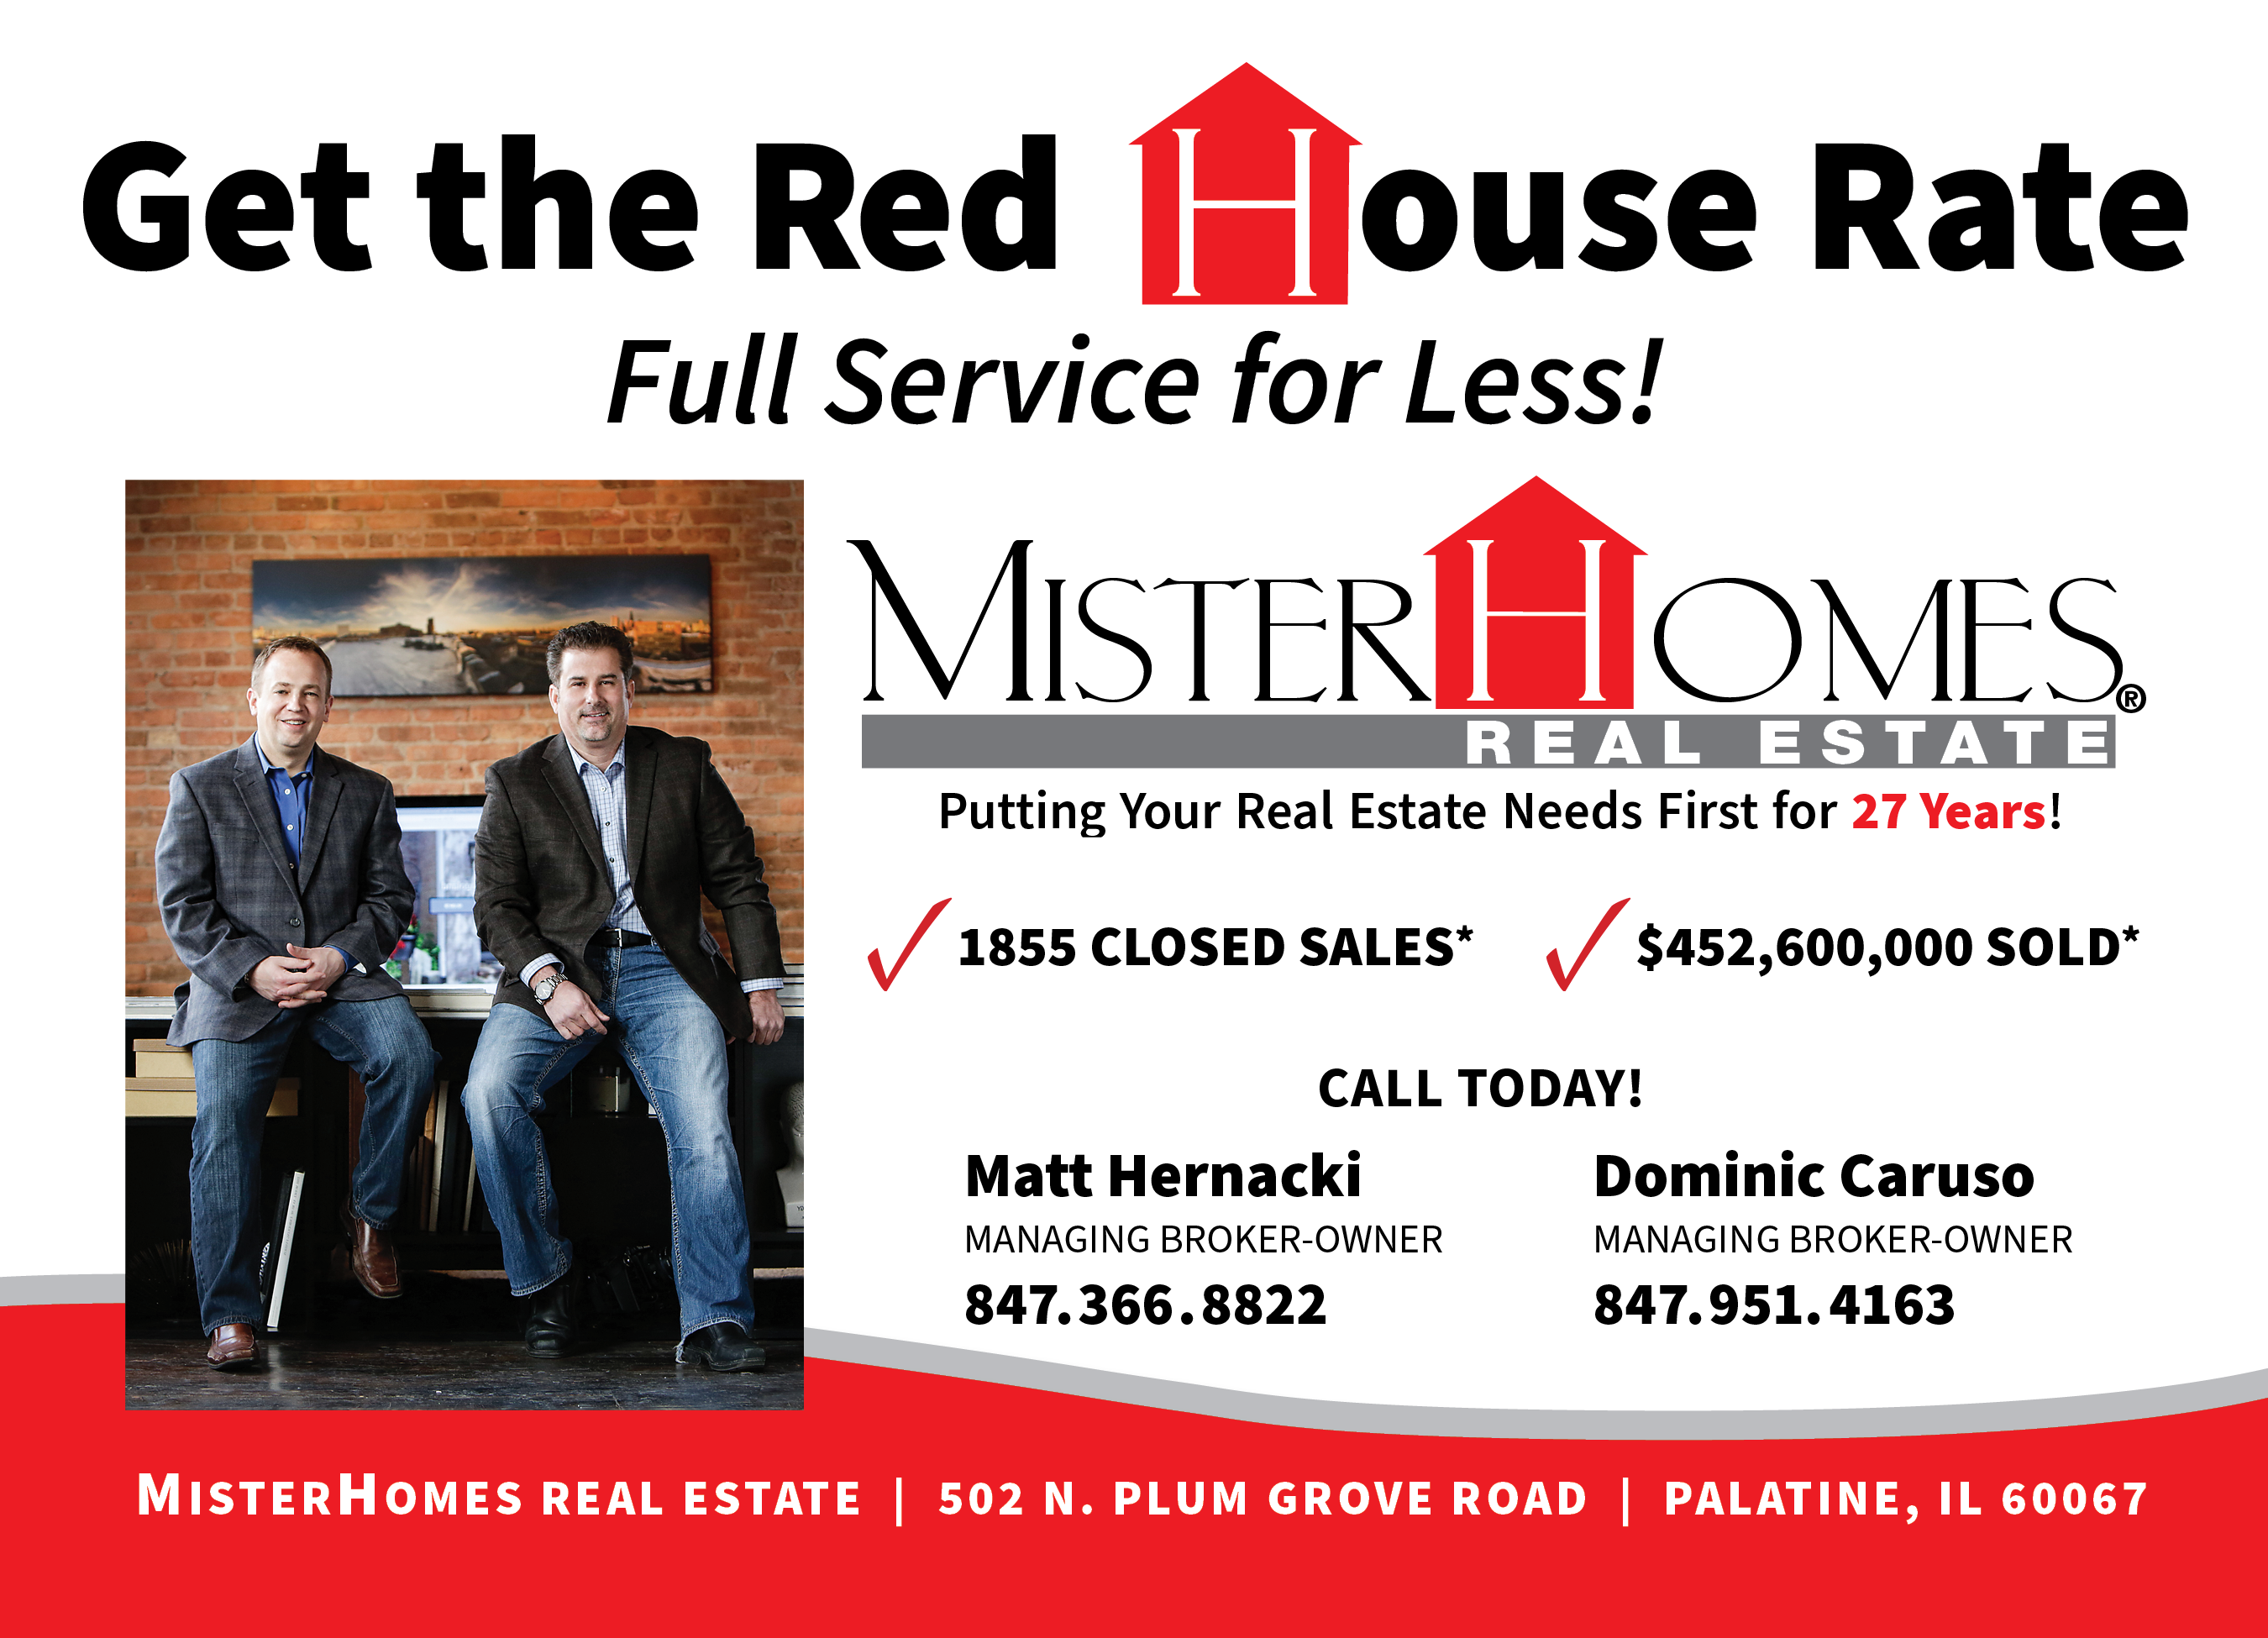 Red House Rate for Real Estate - MisterHomes